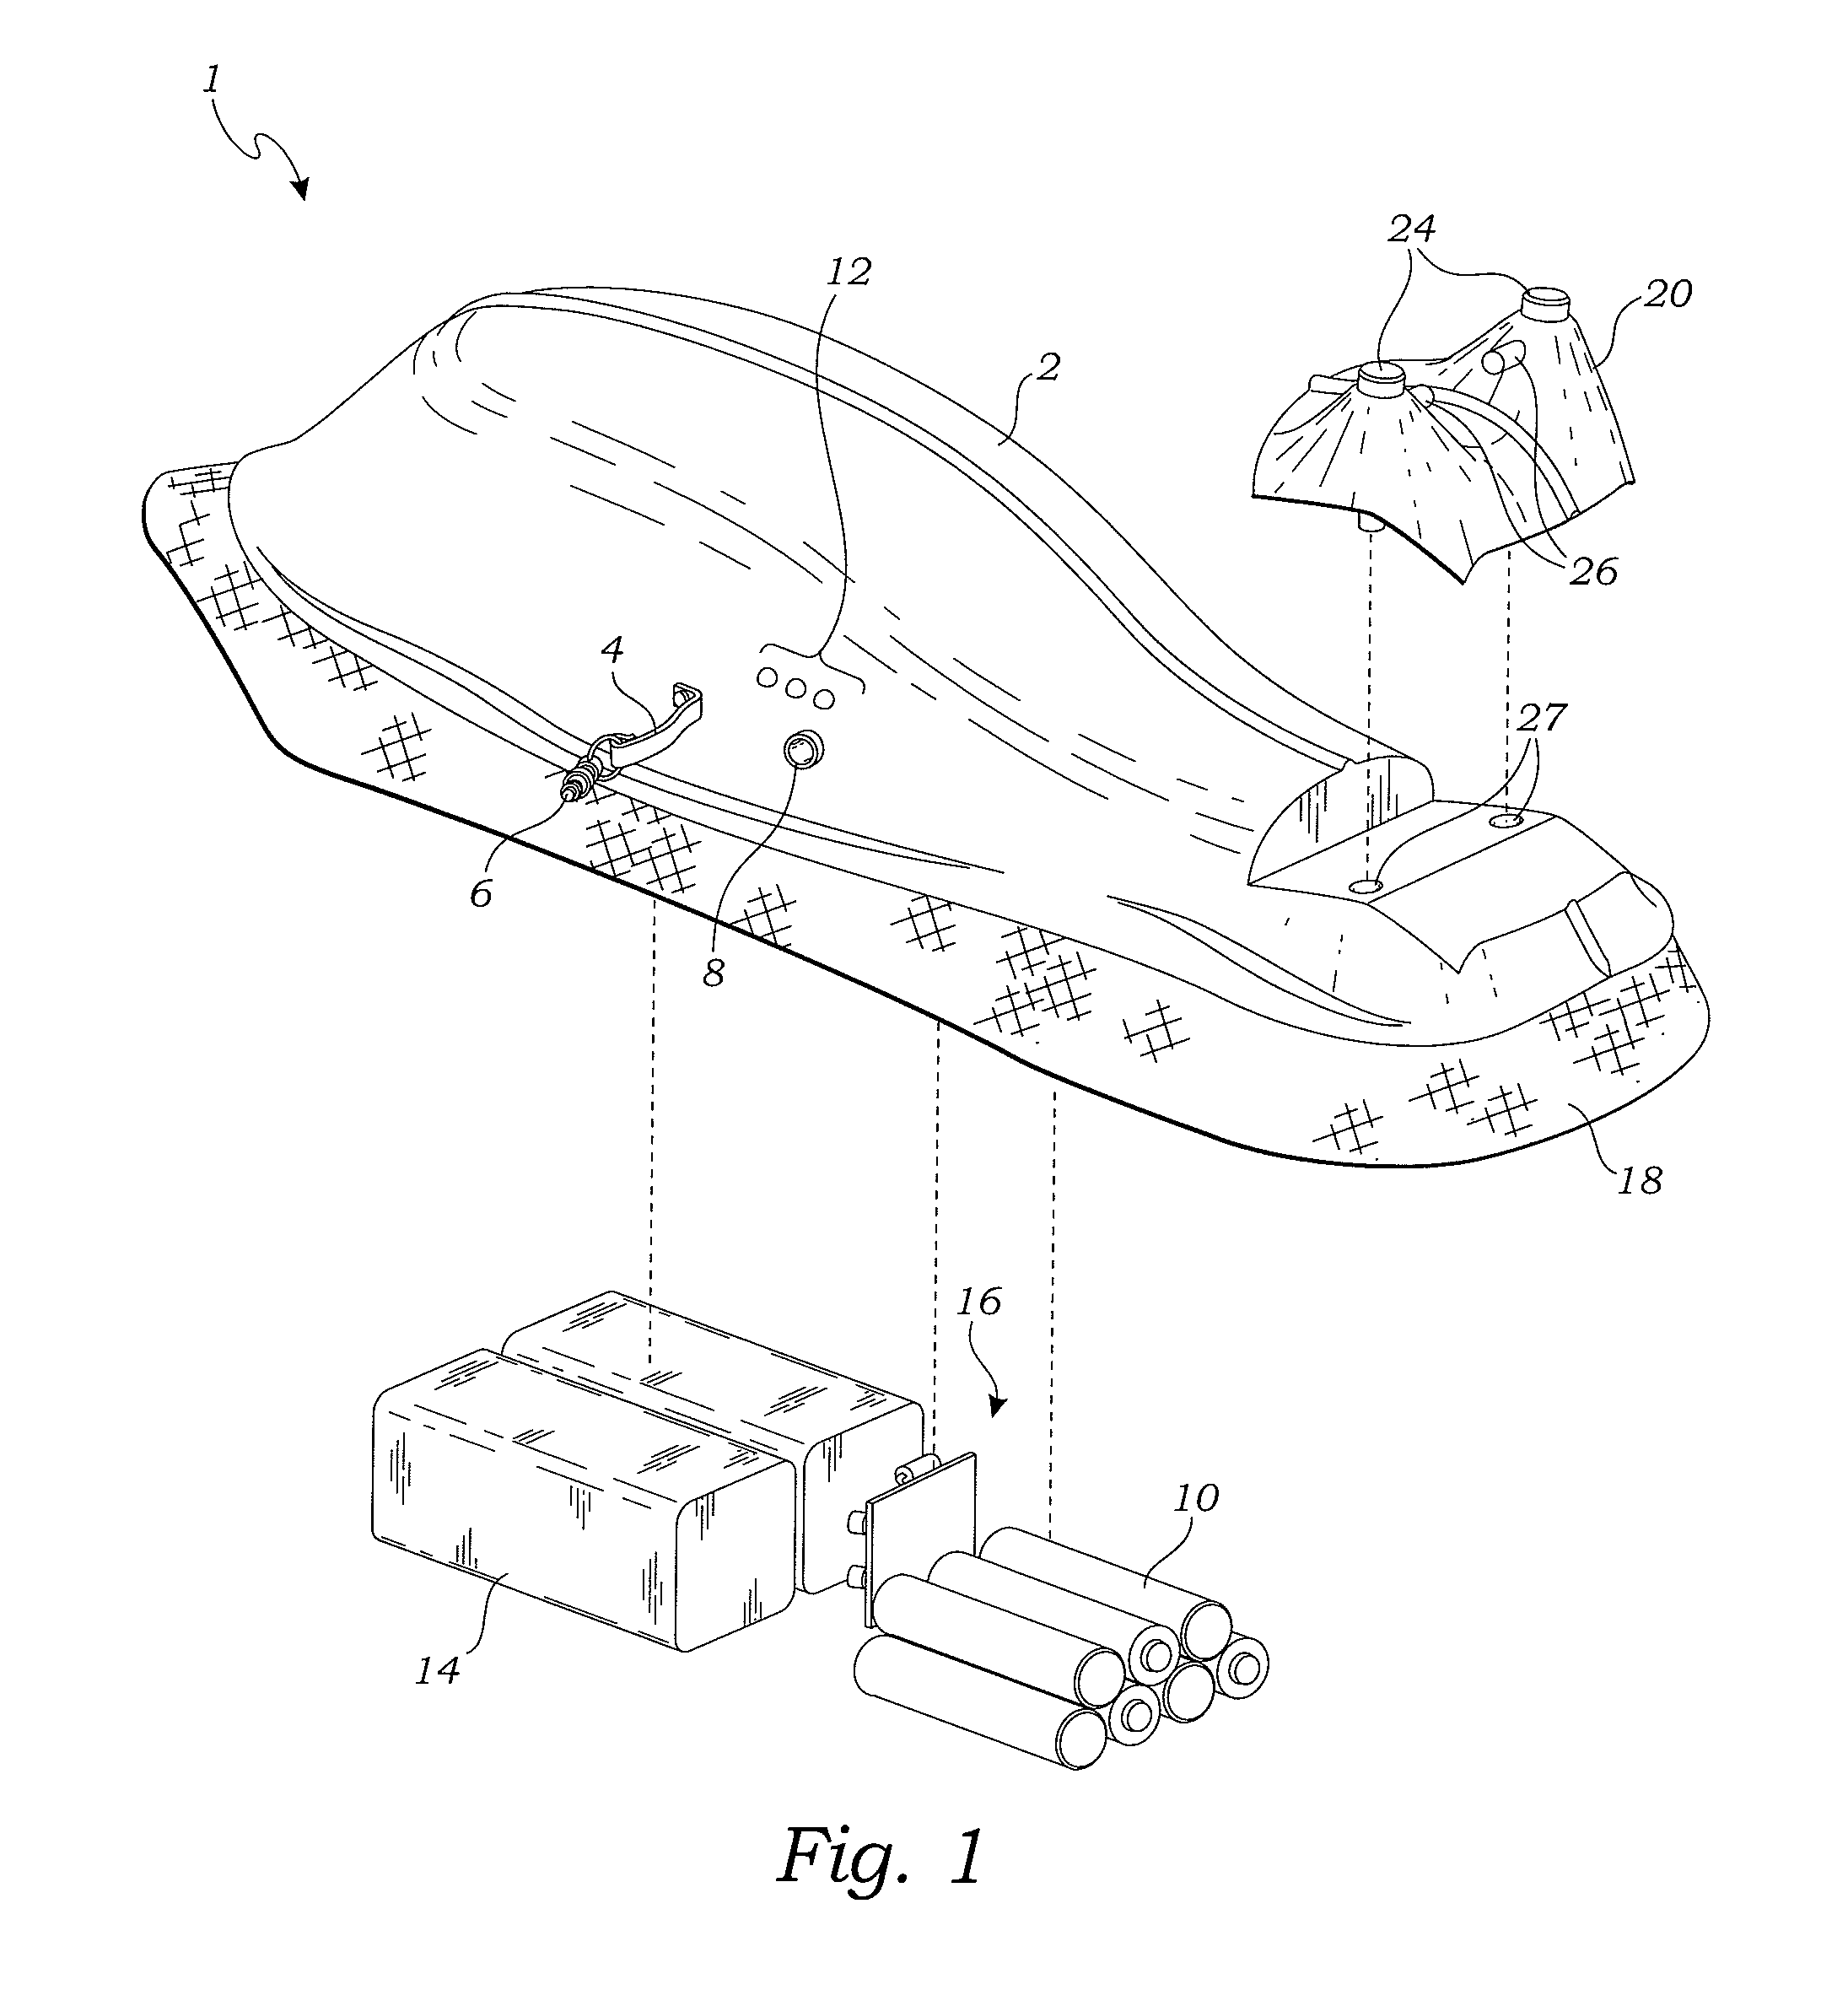 Wearable shield and self-defense device including multiple integrated components